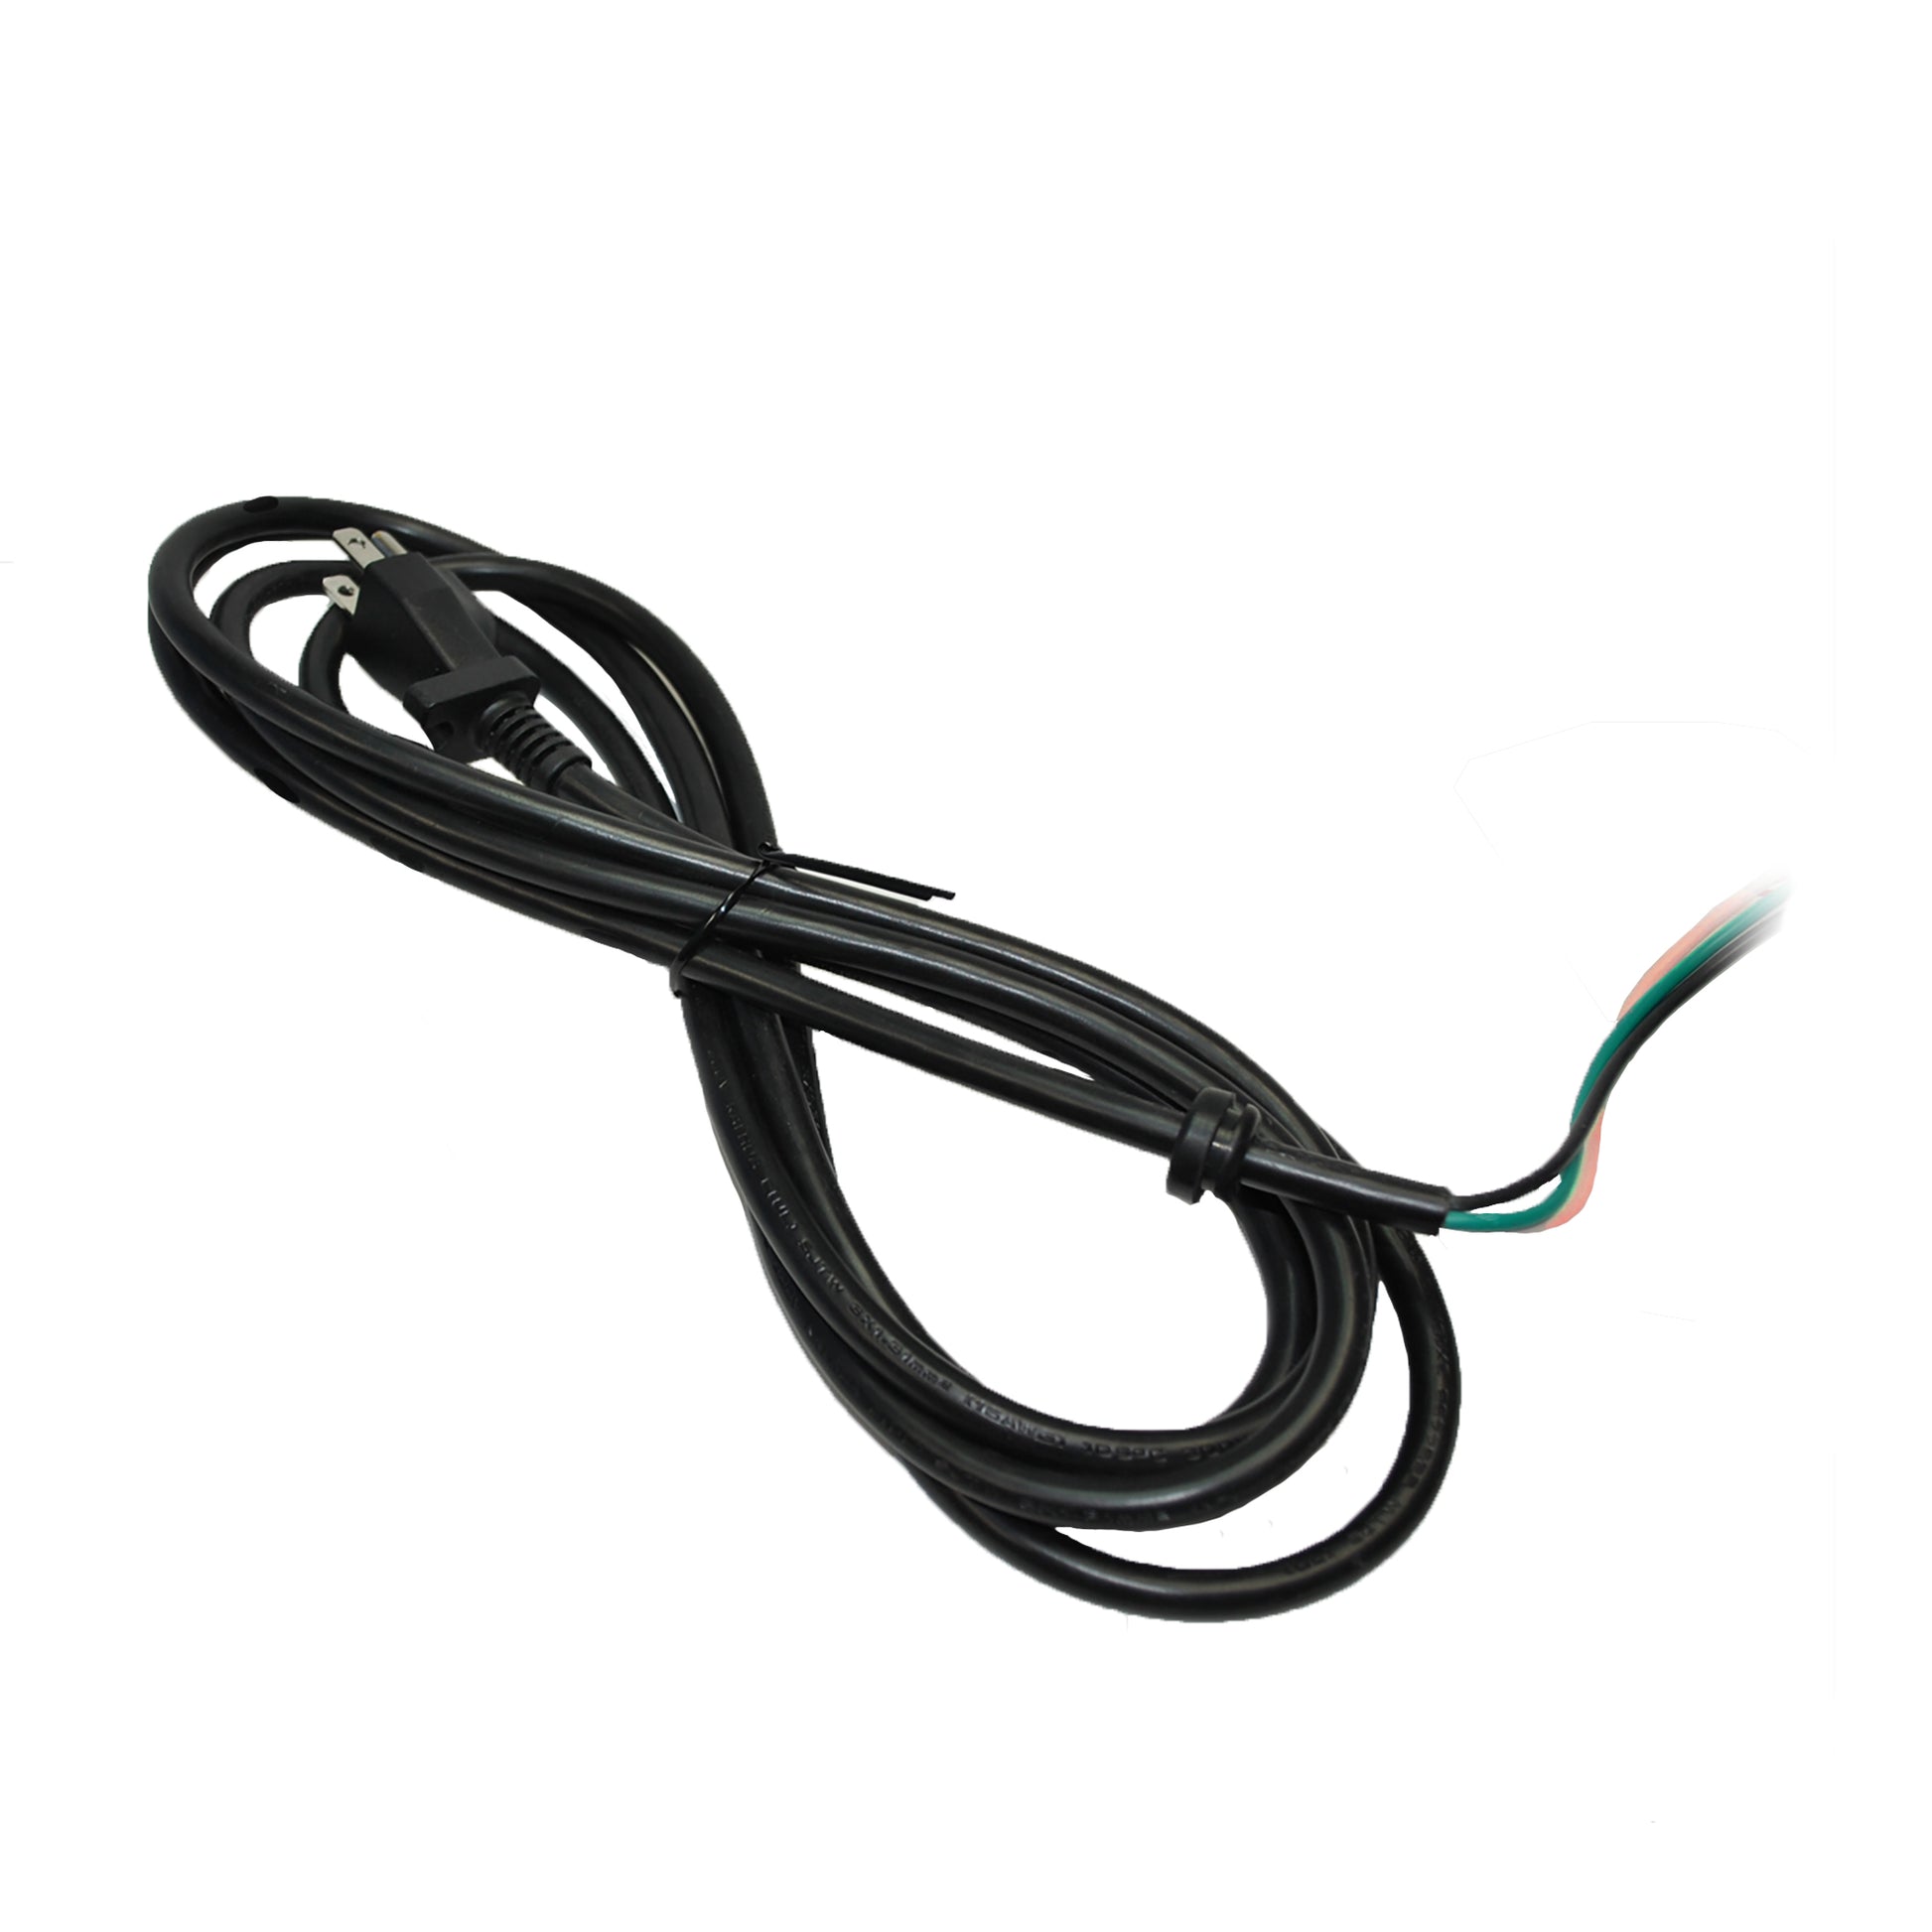 Power Cord for X-600/800 Air Mover